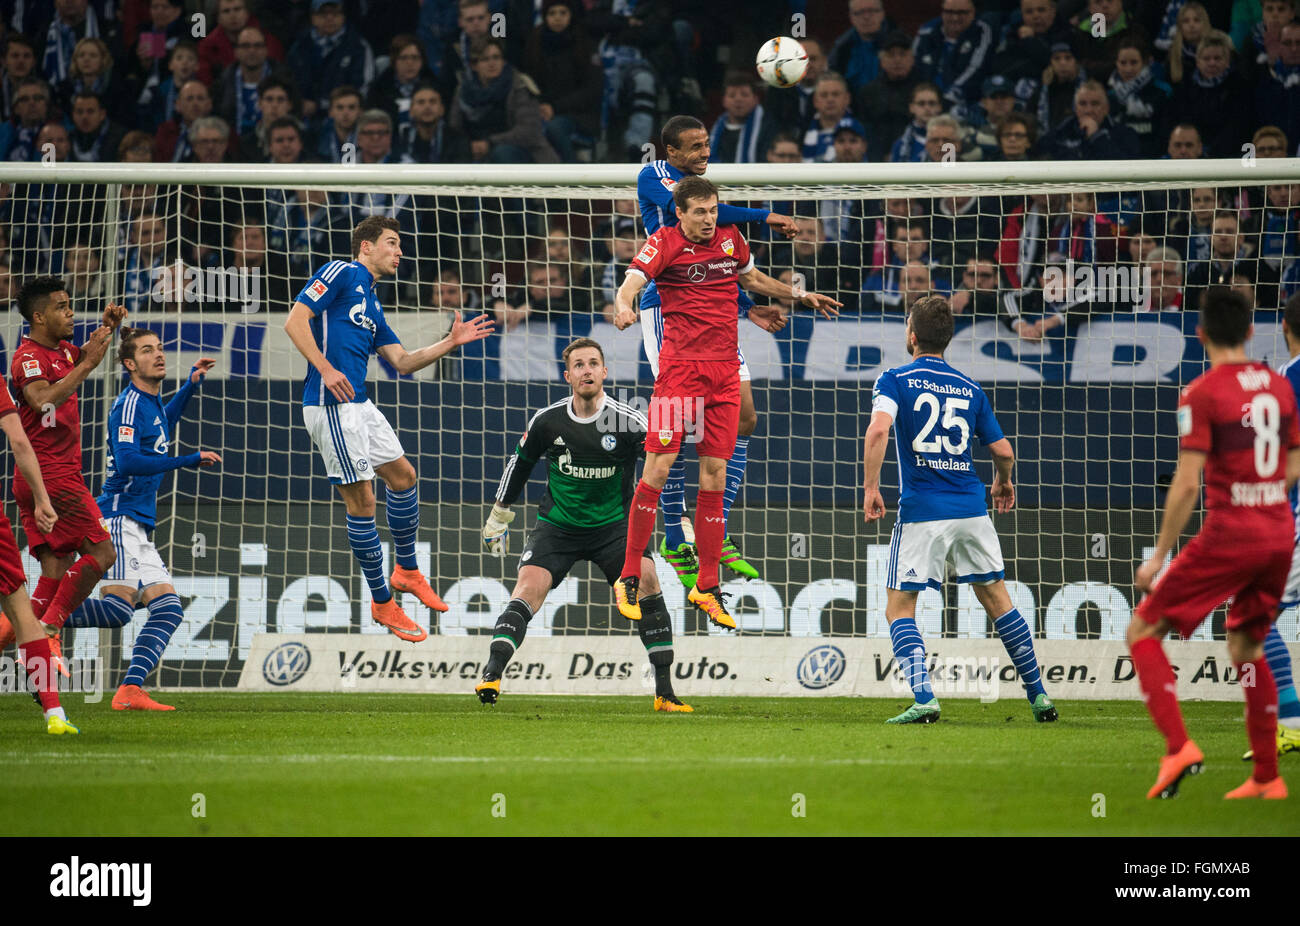 Gelsenkirchen, Germany. 21st Feb, 2016. Schalke's Joel Matip (c) und Stuttgart's Daniel Schwaab in action during the Bundesliga soccer match between FC Schalke 04 and VfB Stuttgart at the Veltins Arena in Gelsenkirchen, Germany, 21 February 2016. PHOTO: BERND THISSEN/dpa (ATTENTION EDITORS: Due to the accreditation guidelines, the DFL only permits the publication of up to 15 pictures per match on the internet and in online media during the match.) © dpa/Alamy Live News Stock Photo